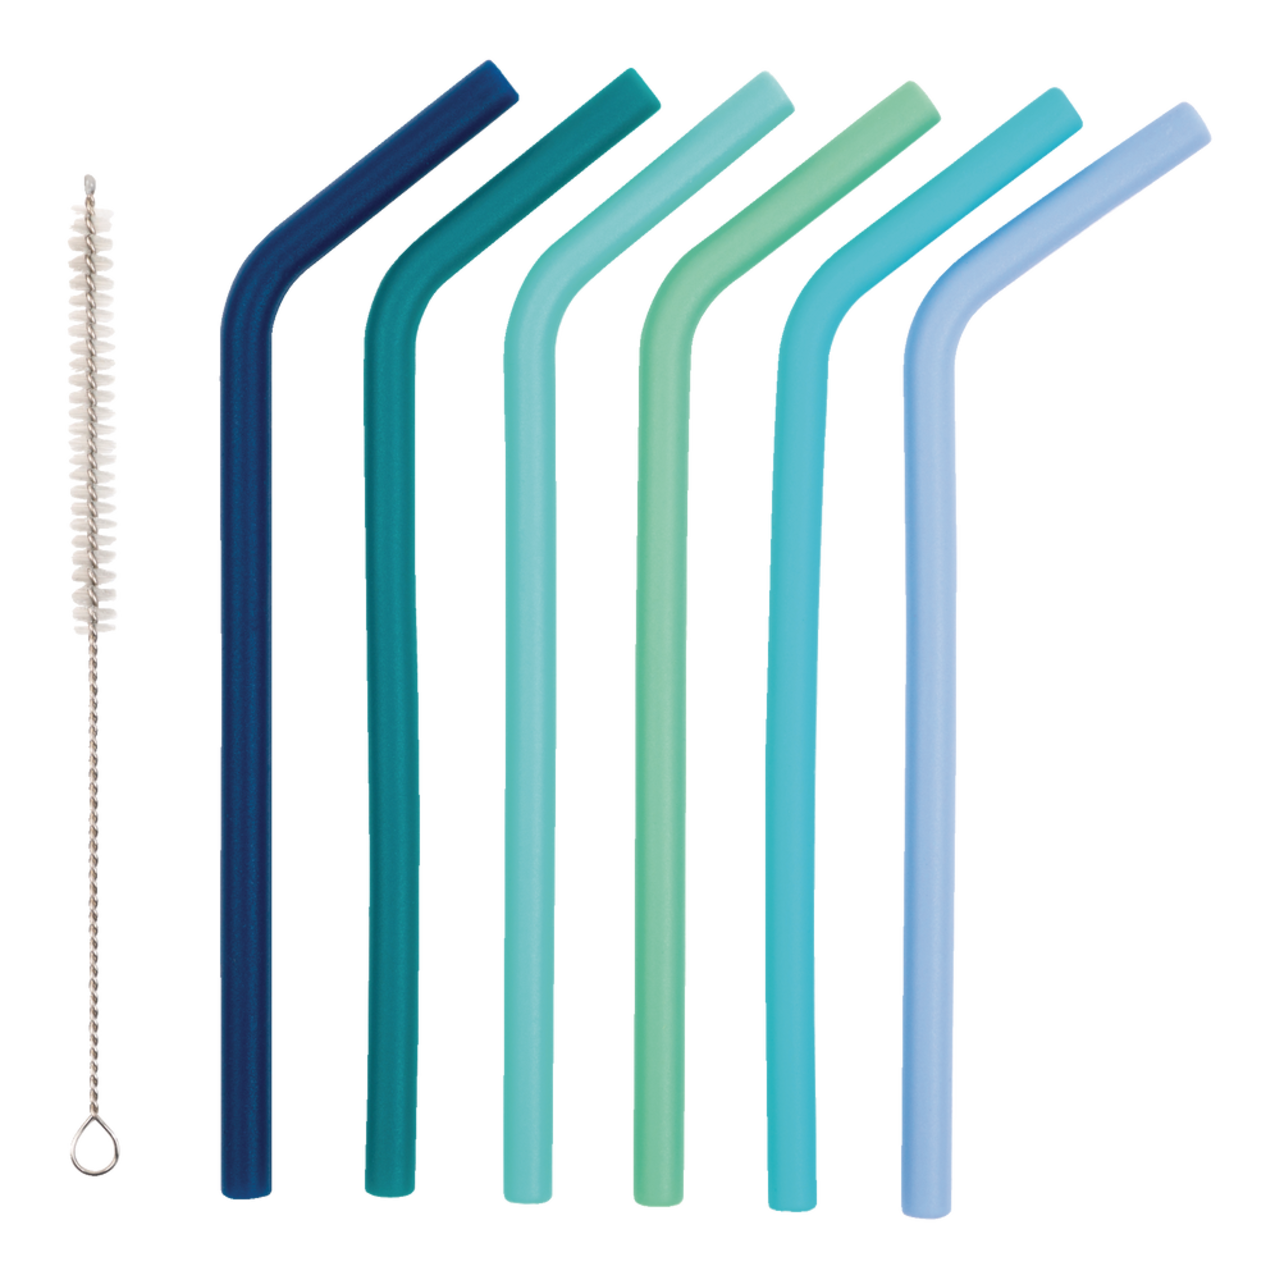 https://media-www.canadiantire.ca/product/living/kitchen/food-storage/1424981/manna-6-piece-silicone-straw-set--550d898e-3a34-49f5-86bf-b6165764e072.png?imdensity=1&imwidth=640&impolicy=mZoom